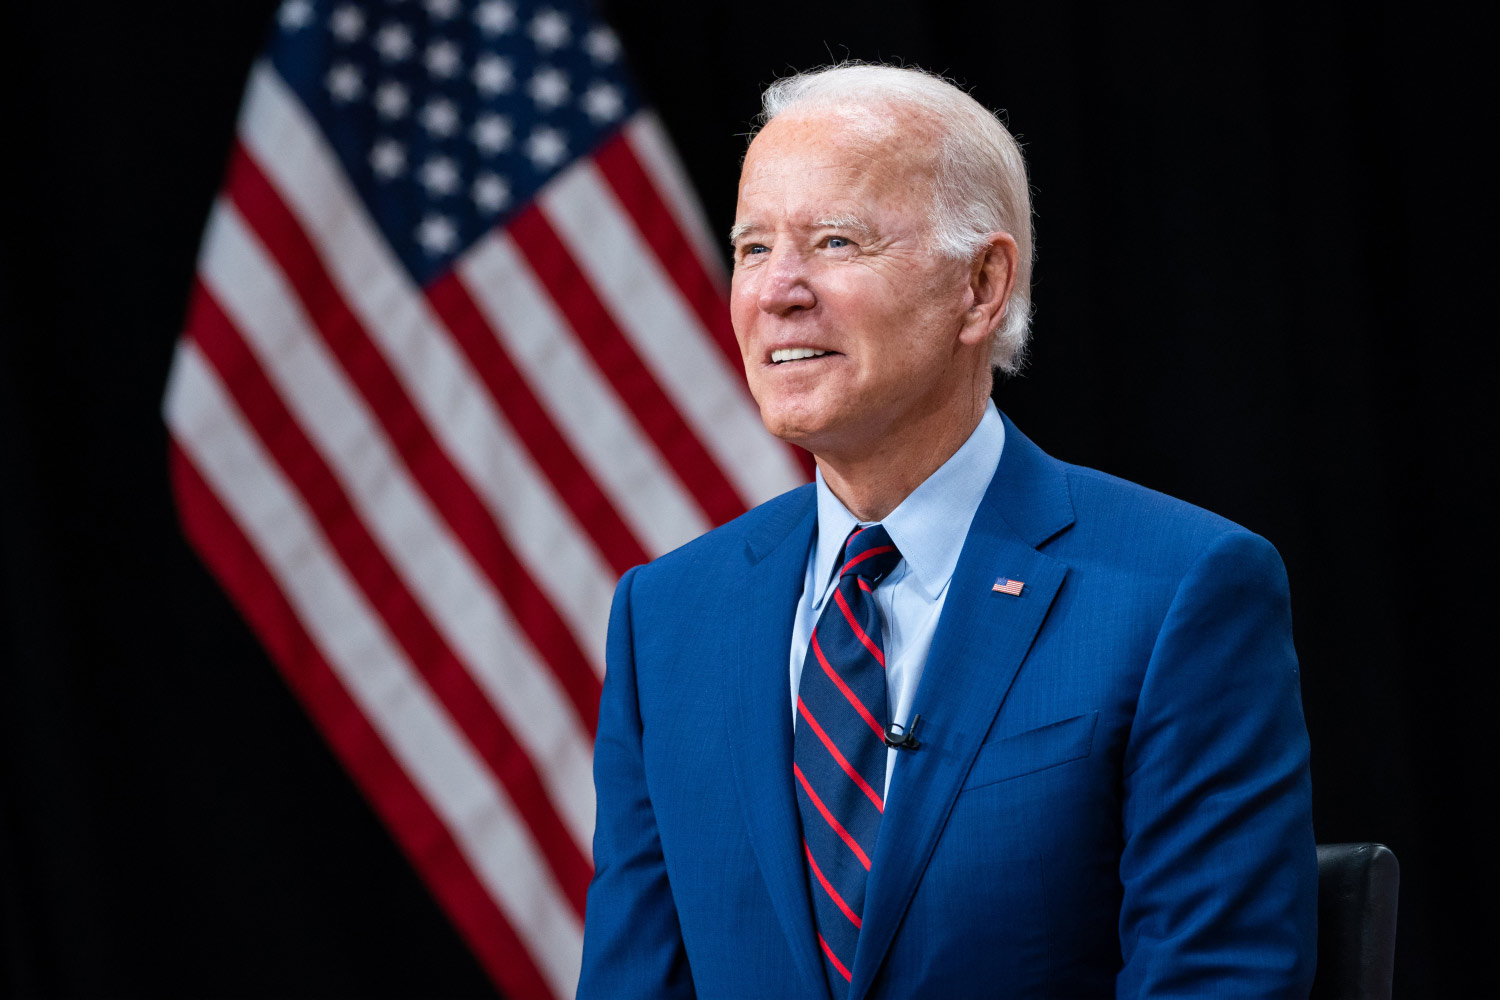 Biden Budget Requests Increase in Pell Grants and More Funding for HBCUs, Renews Call for Free Community College